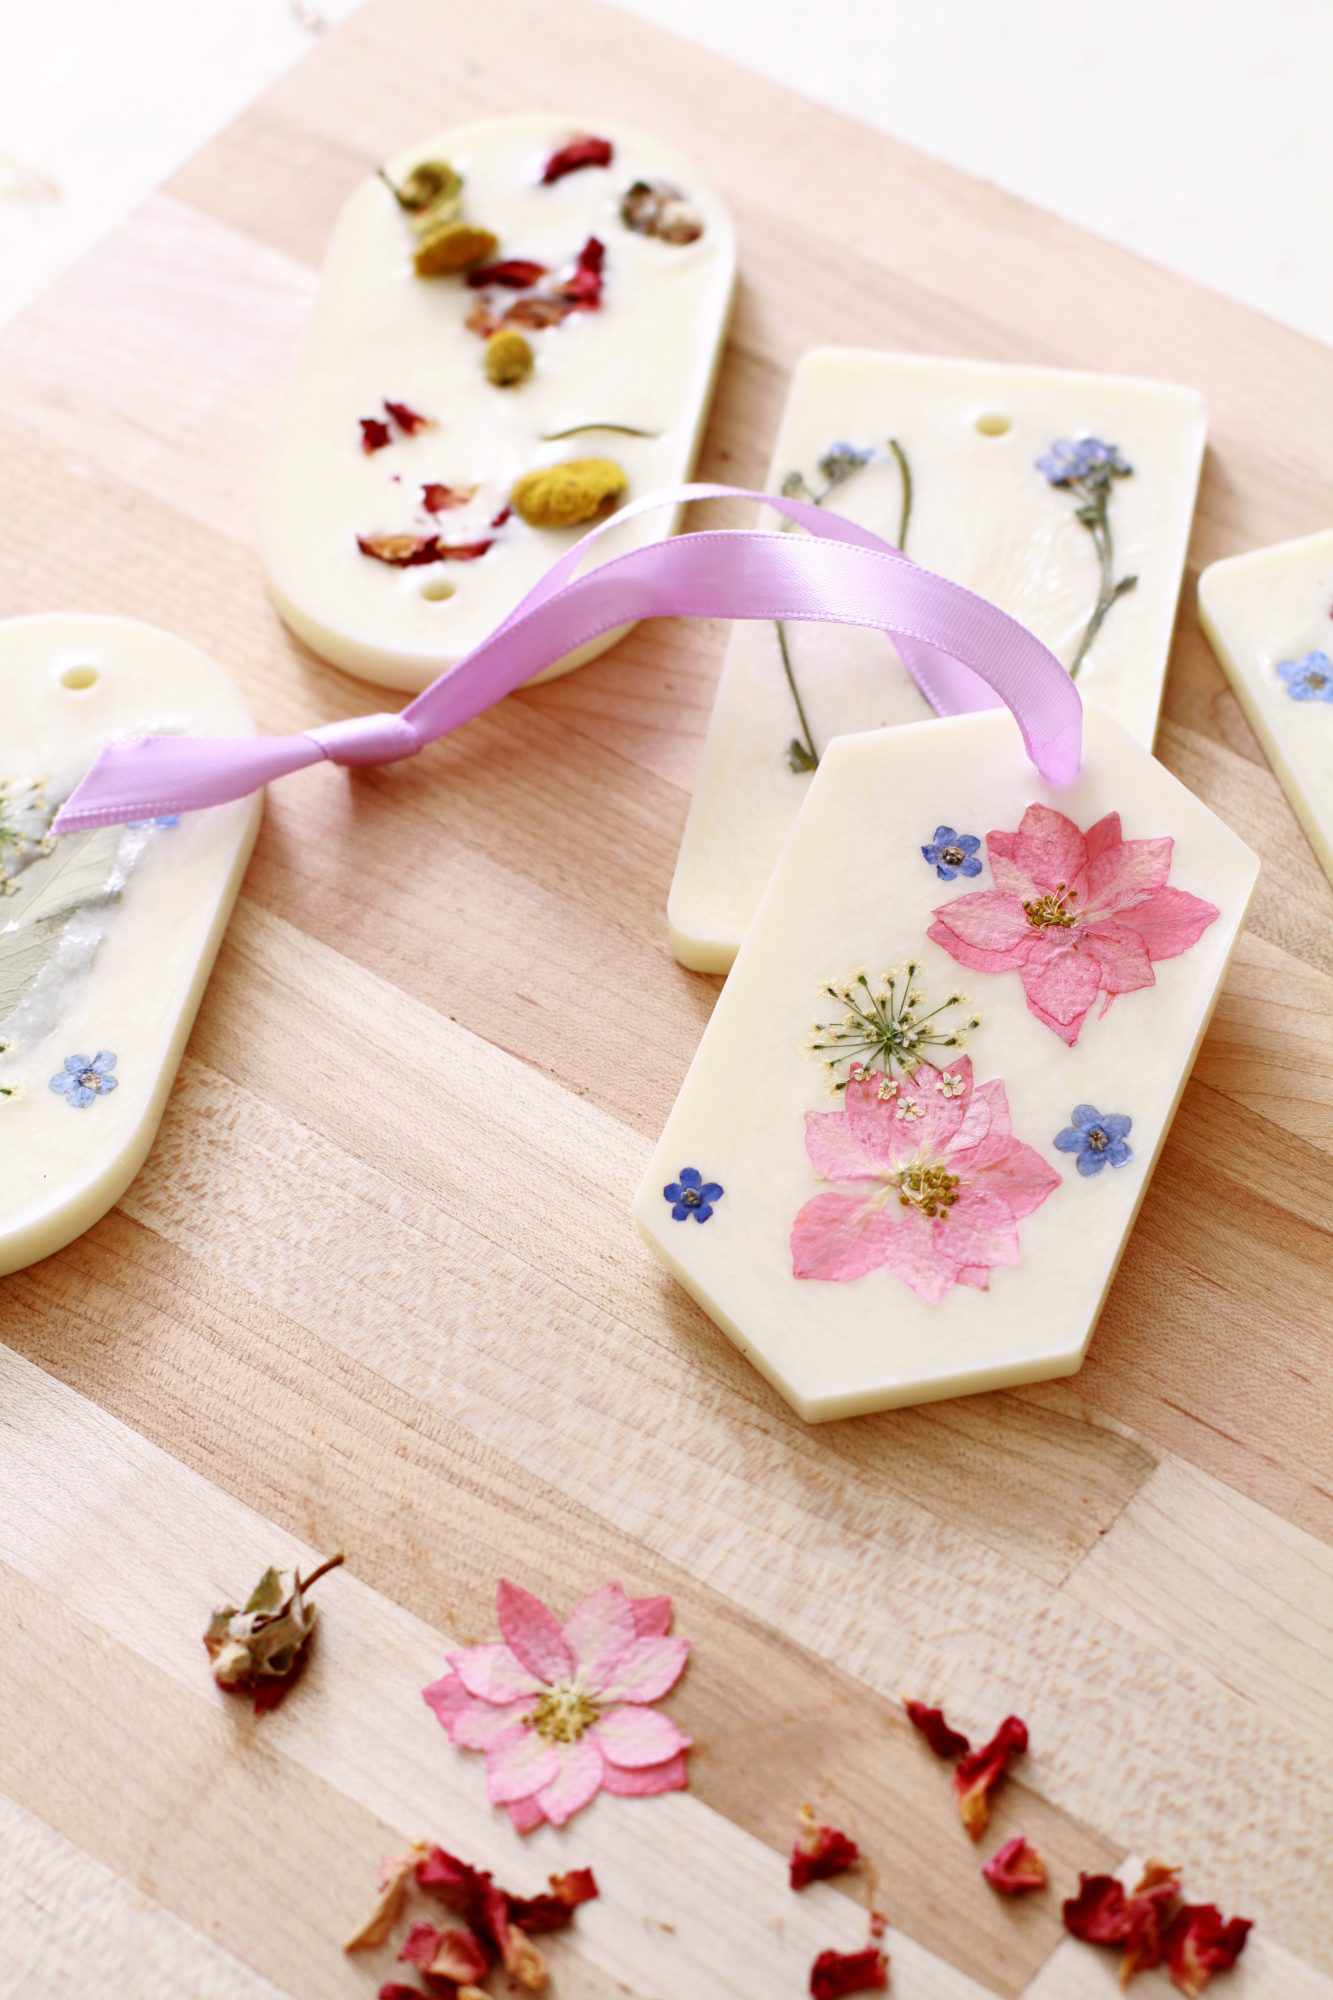 floral wax satchets on wood surface